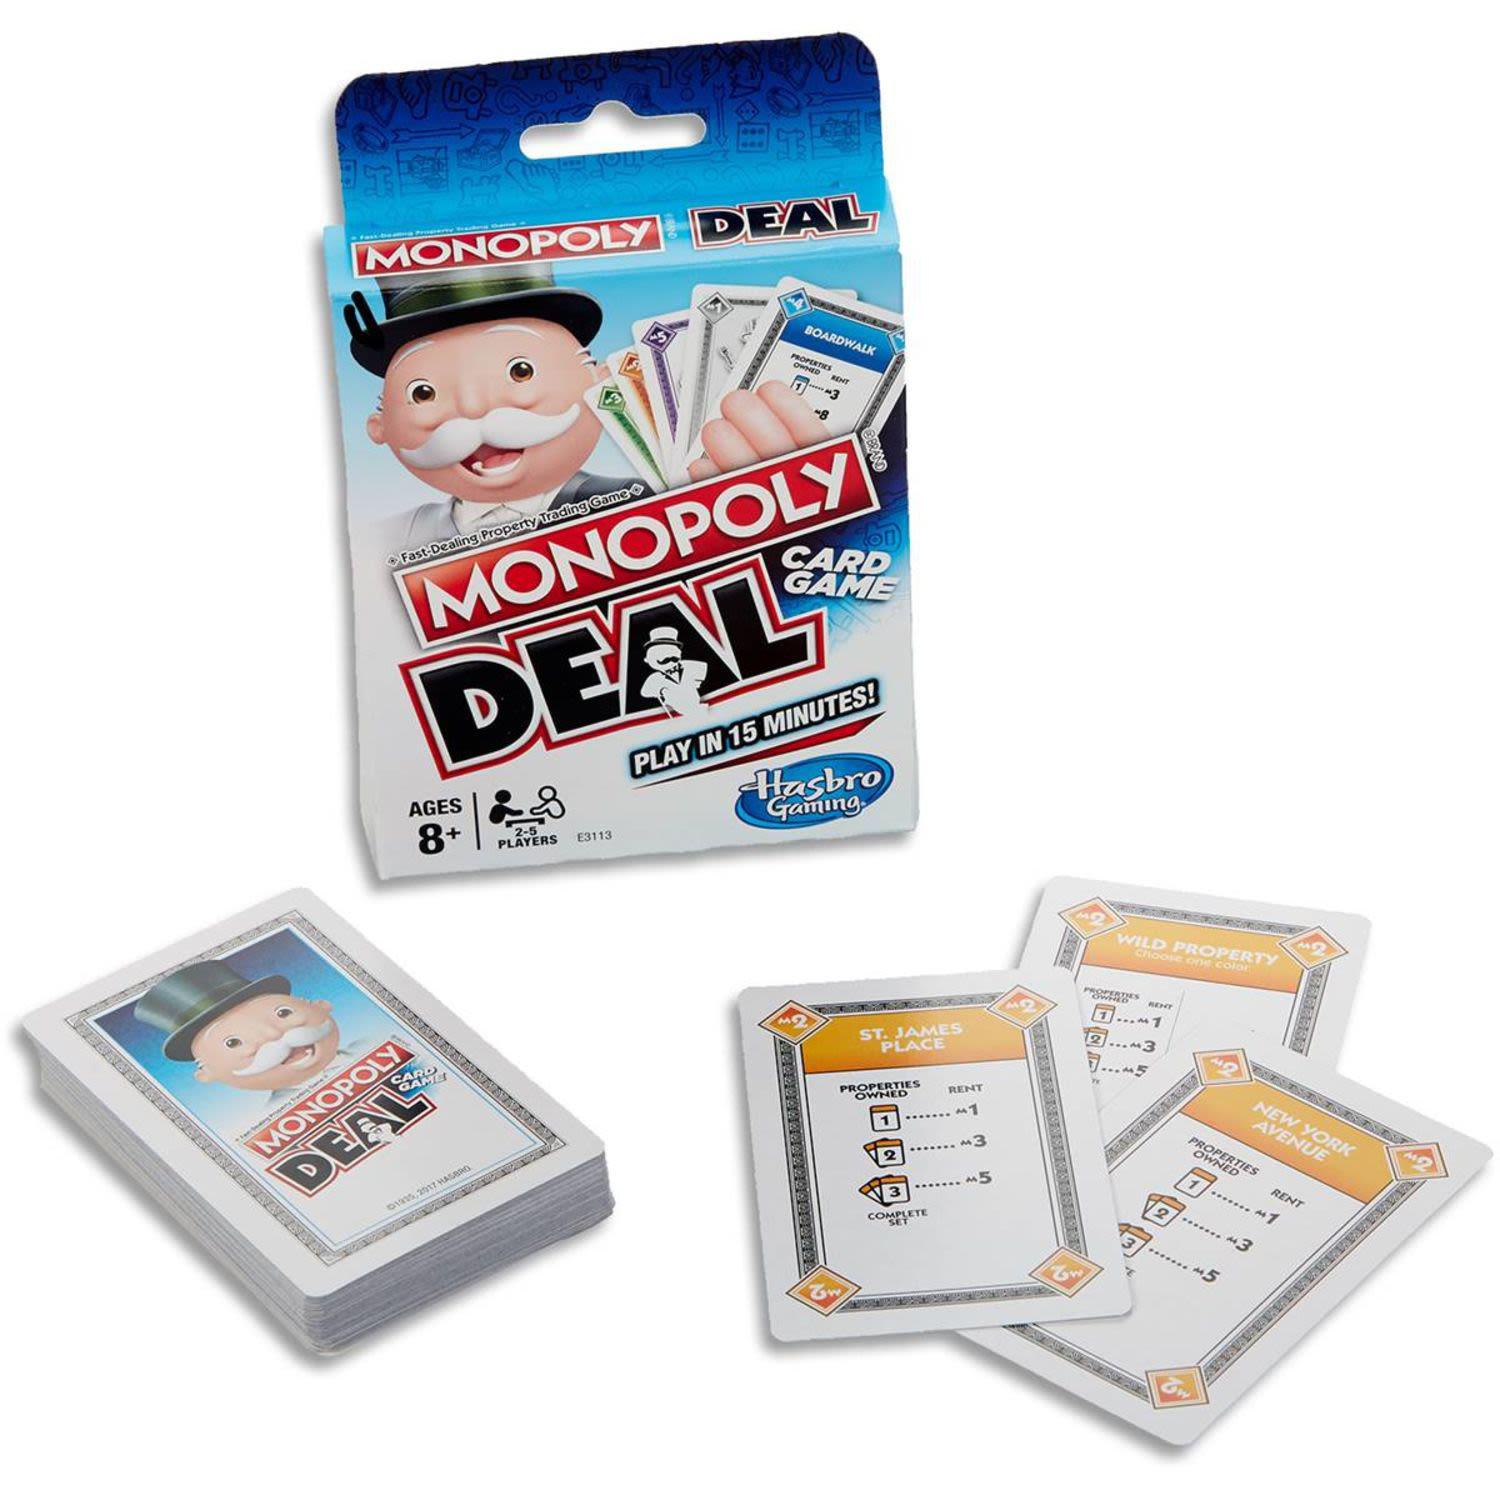 Monopoly Deal Card Game (1 Pack)